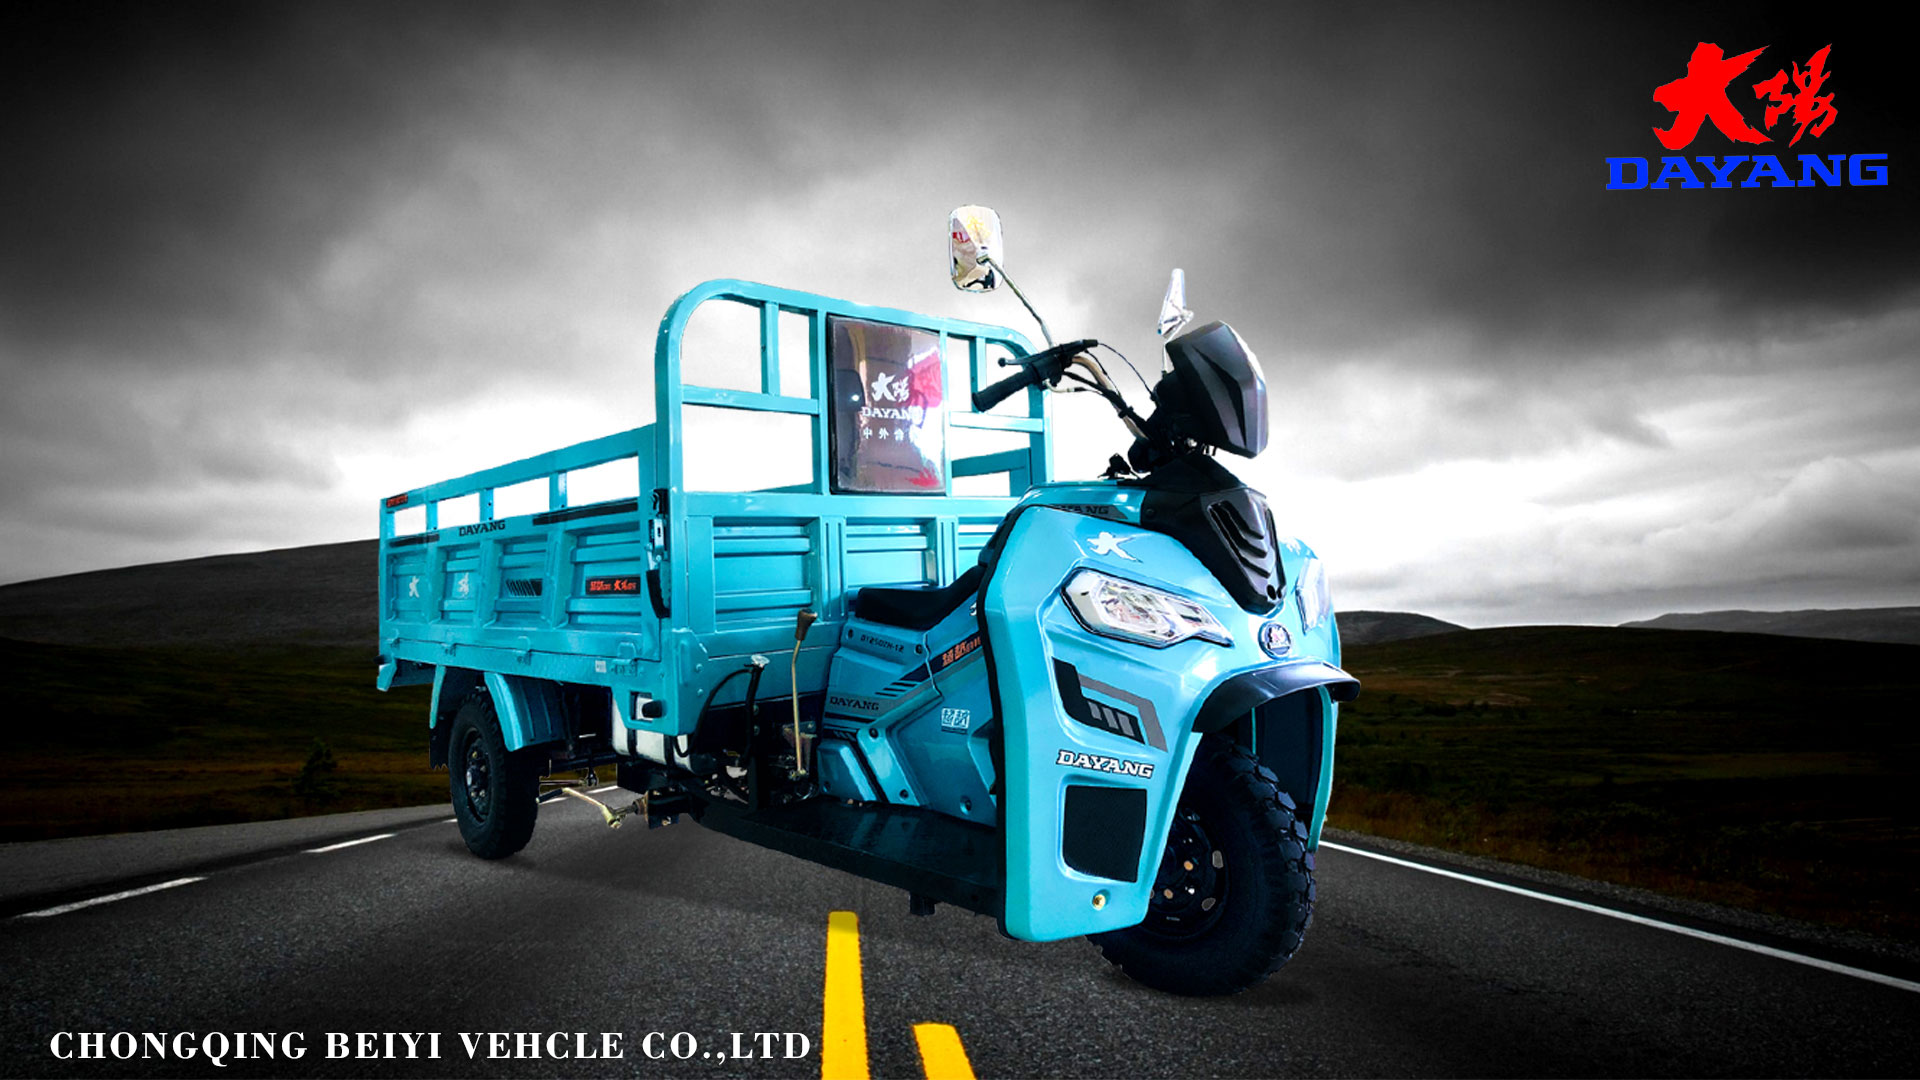 Analysis on the current market situation of China's tricycle industry in 2015